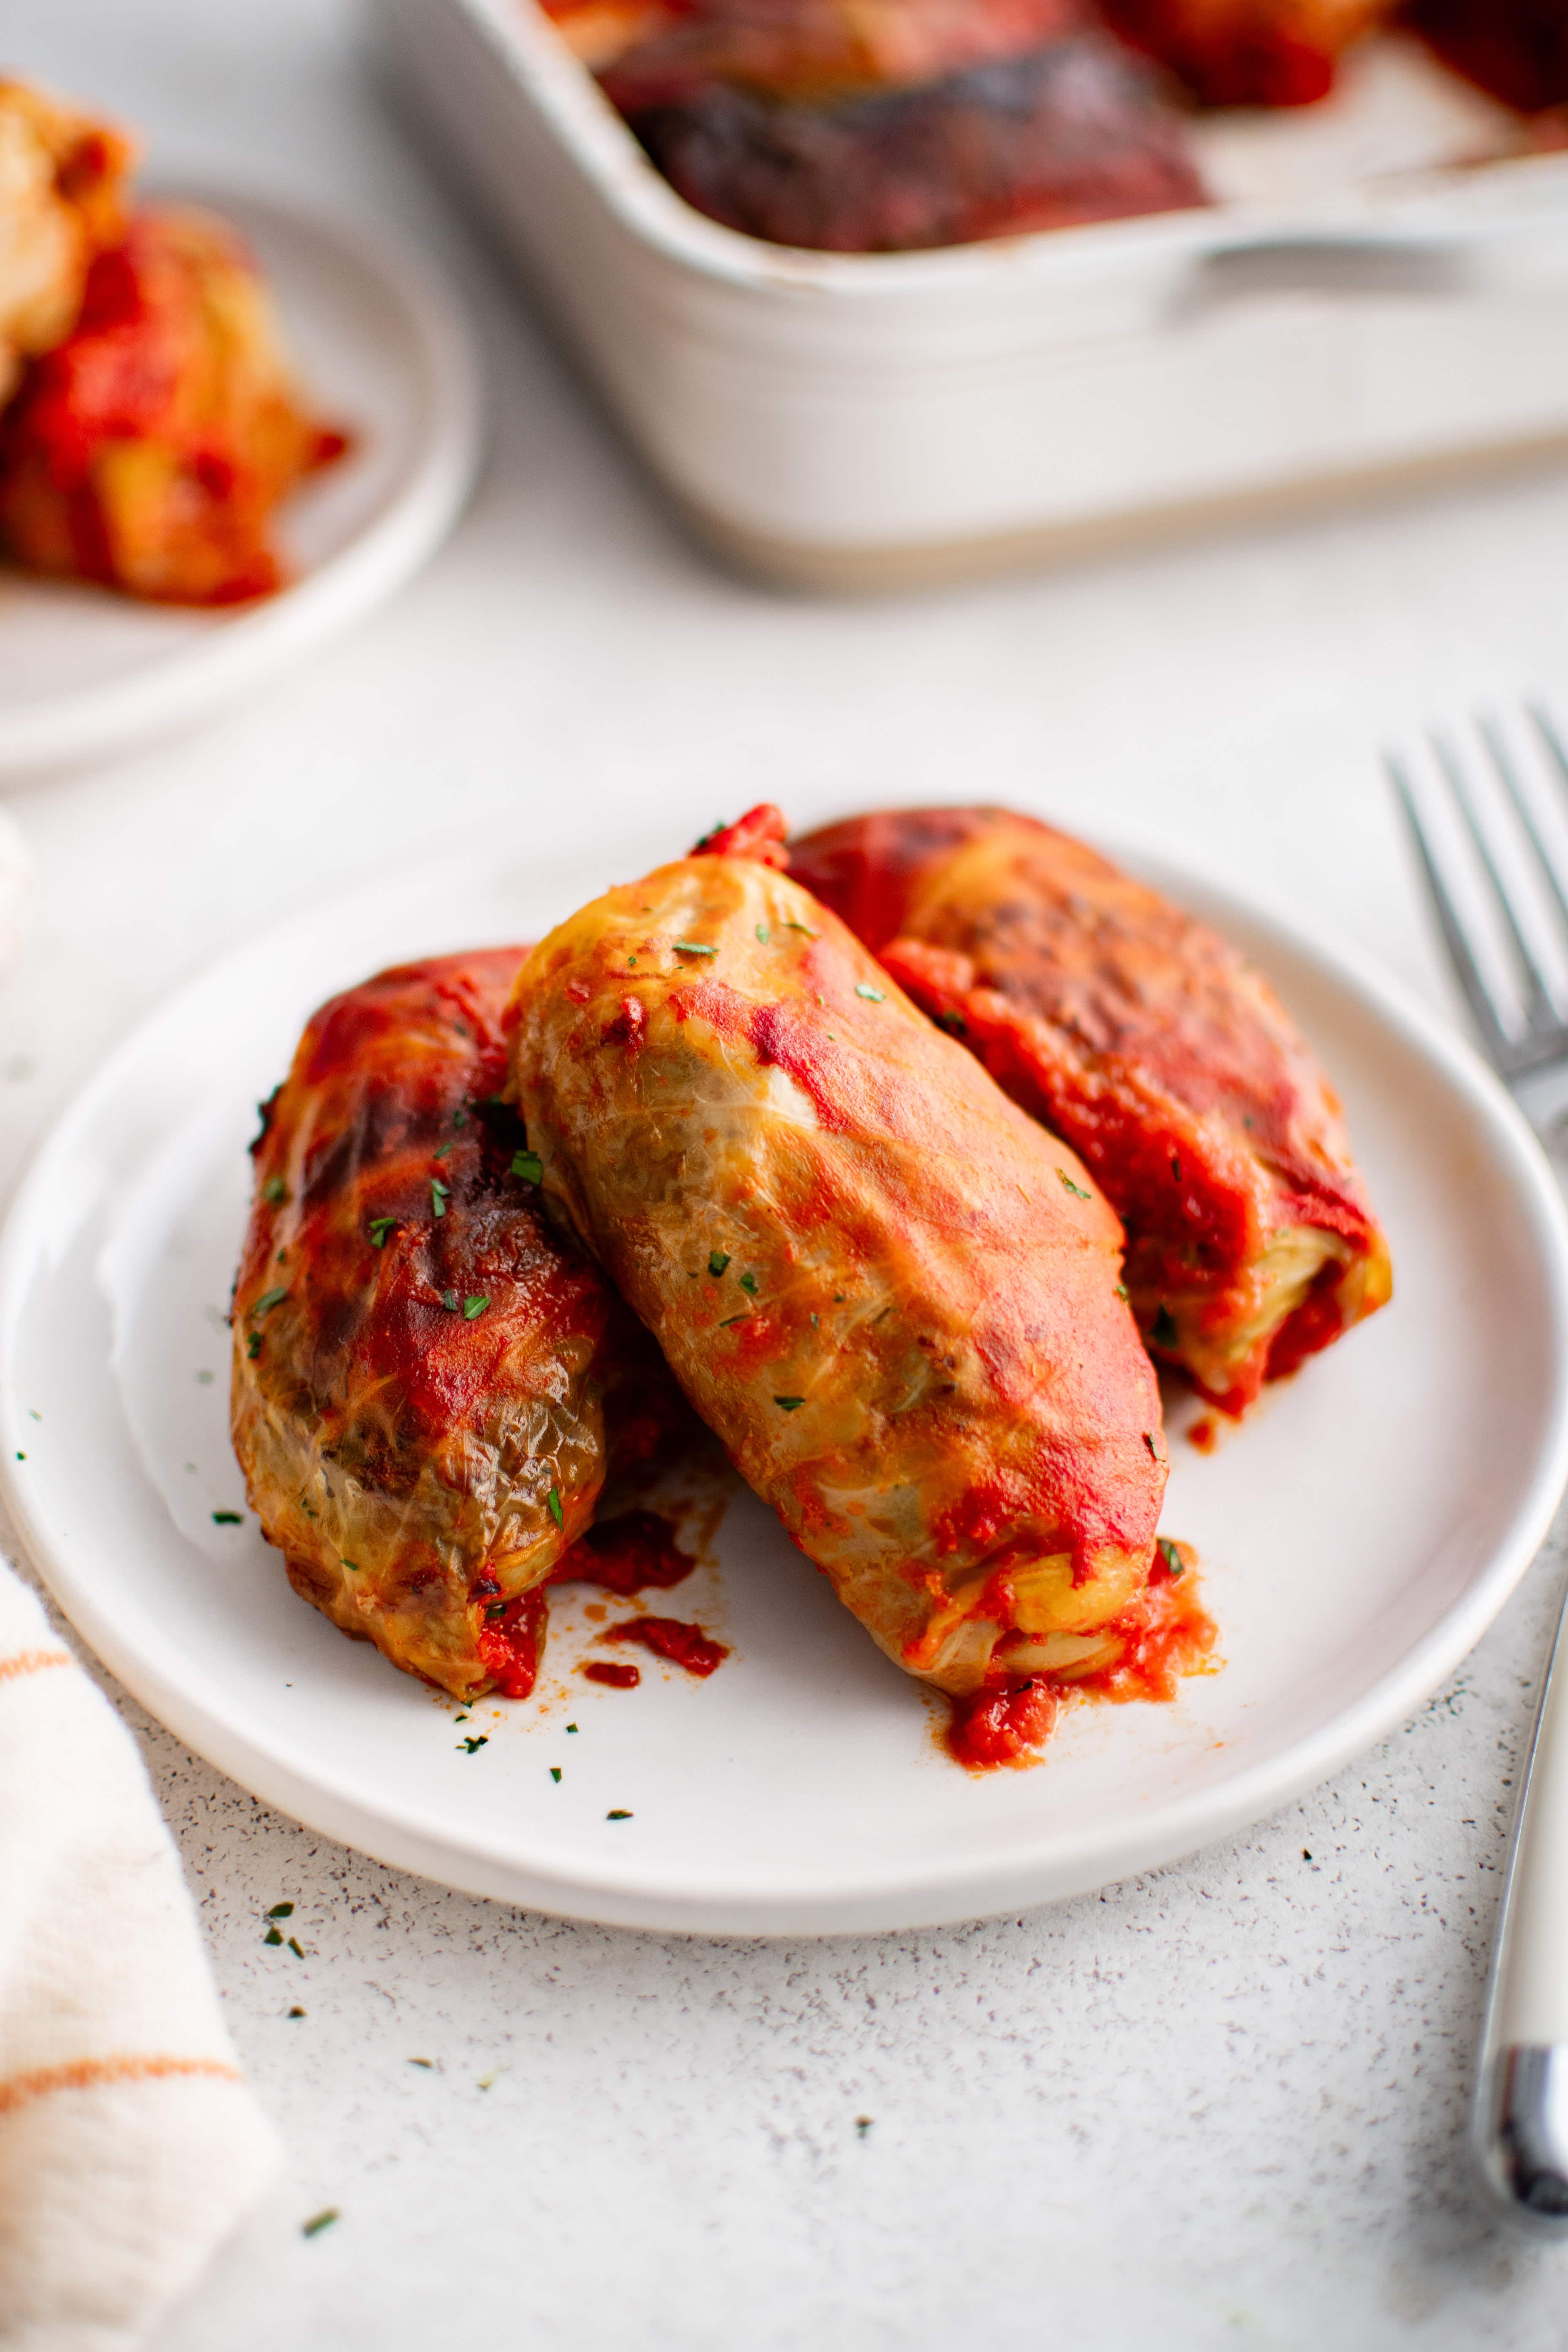 Three pork, beef, and rice stuffed cabbage rolls on a white dinner plate covered in tomato sauce.